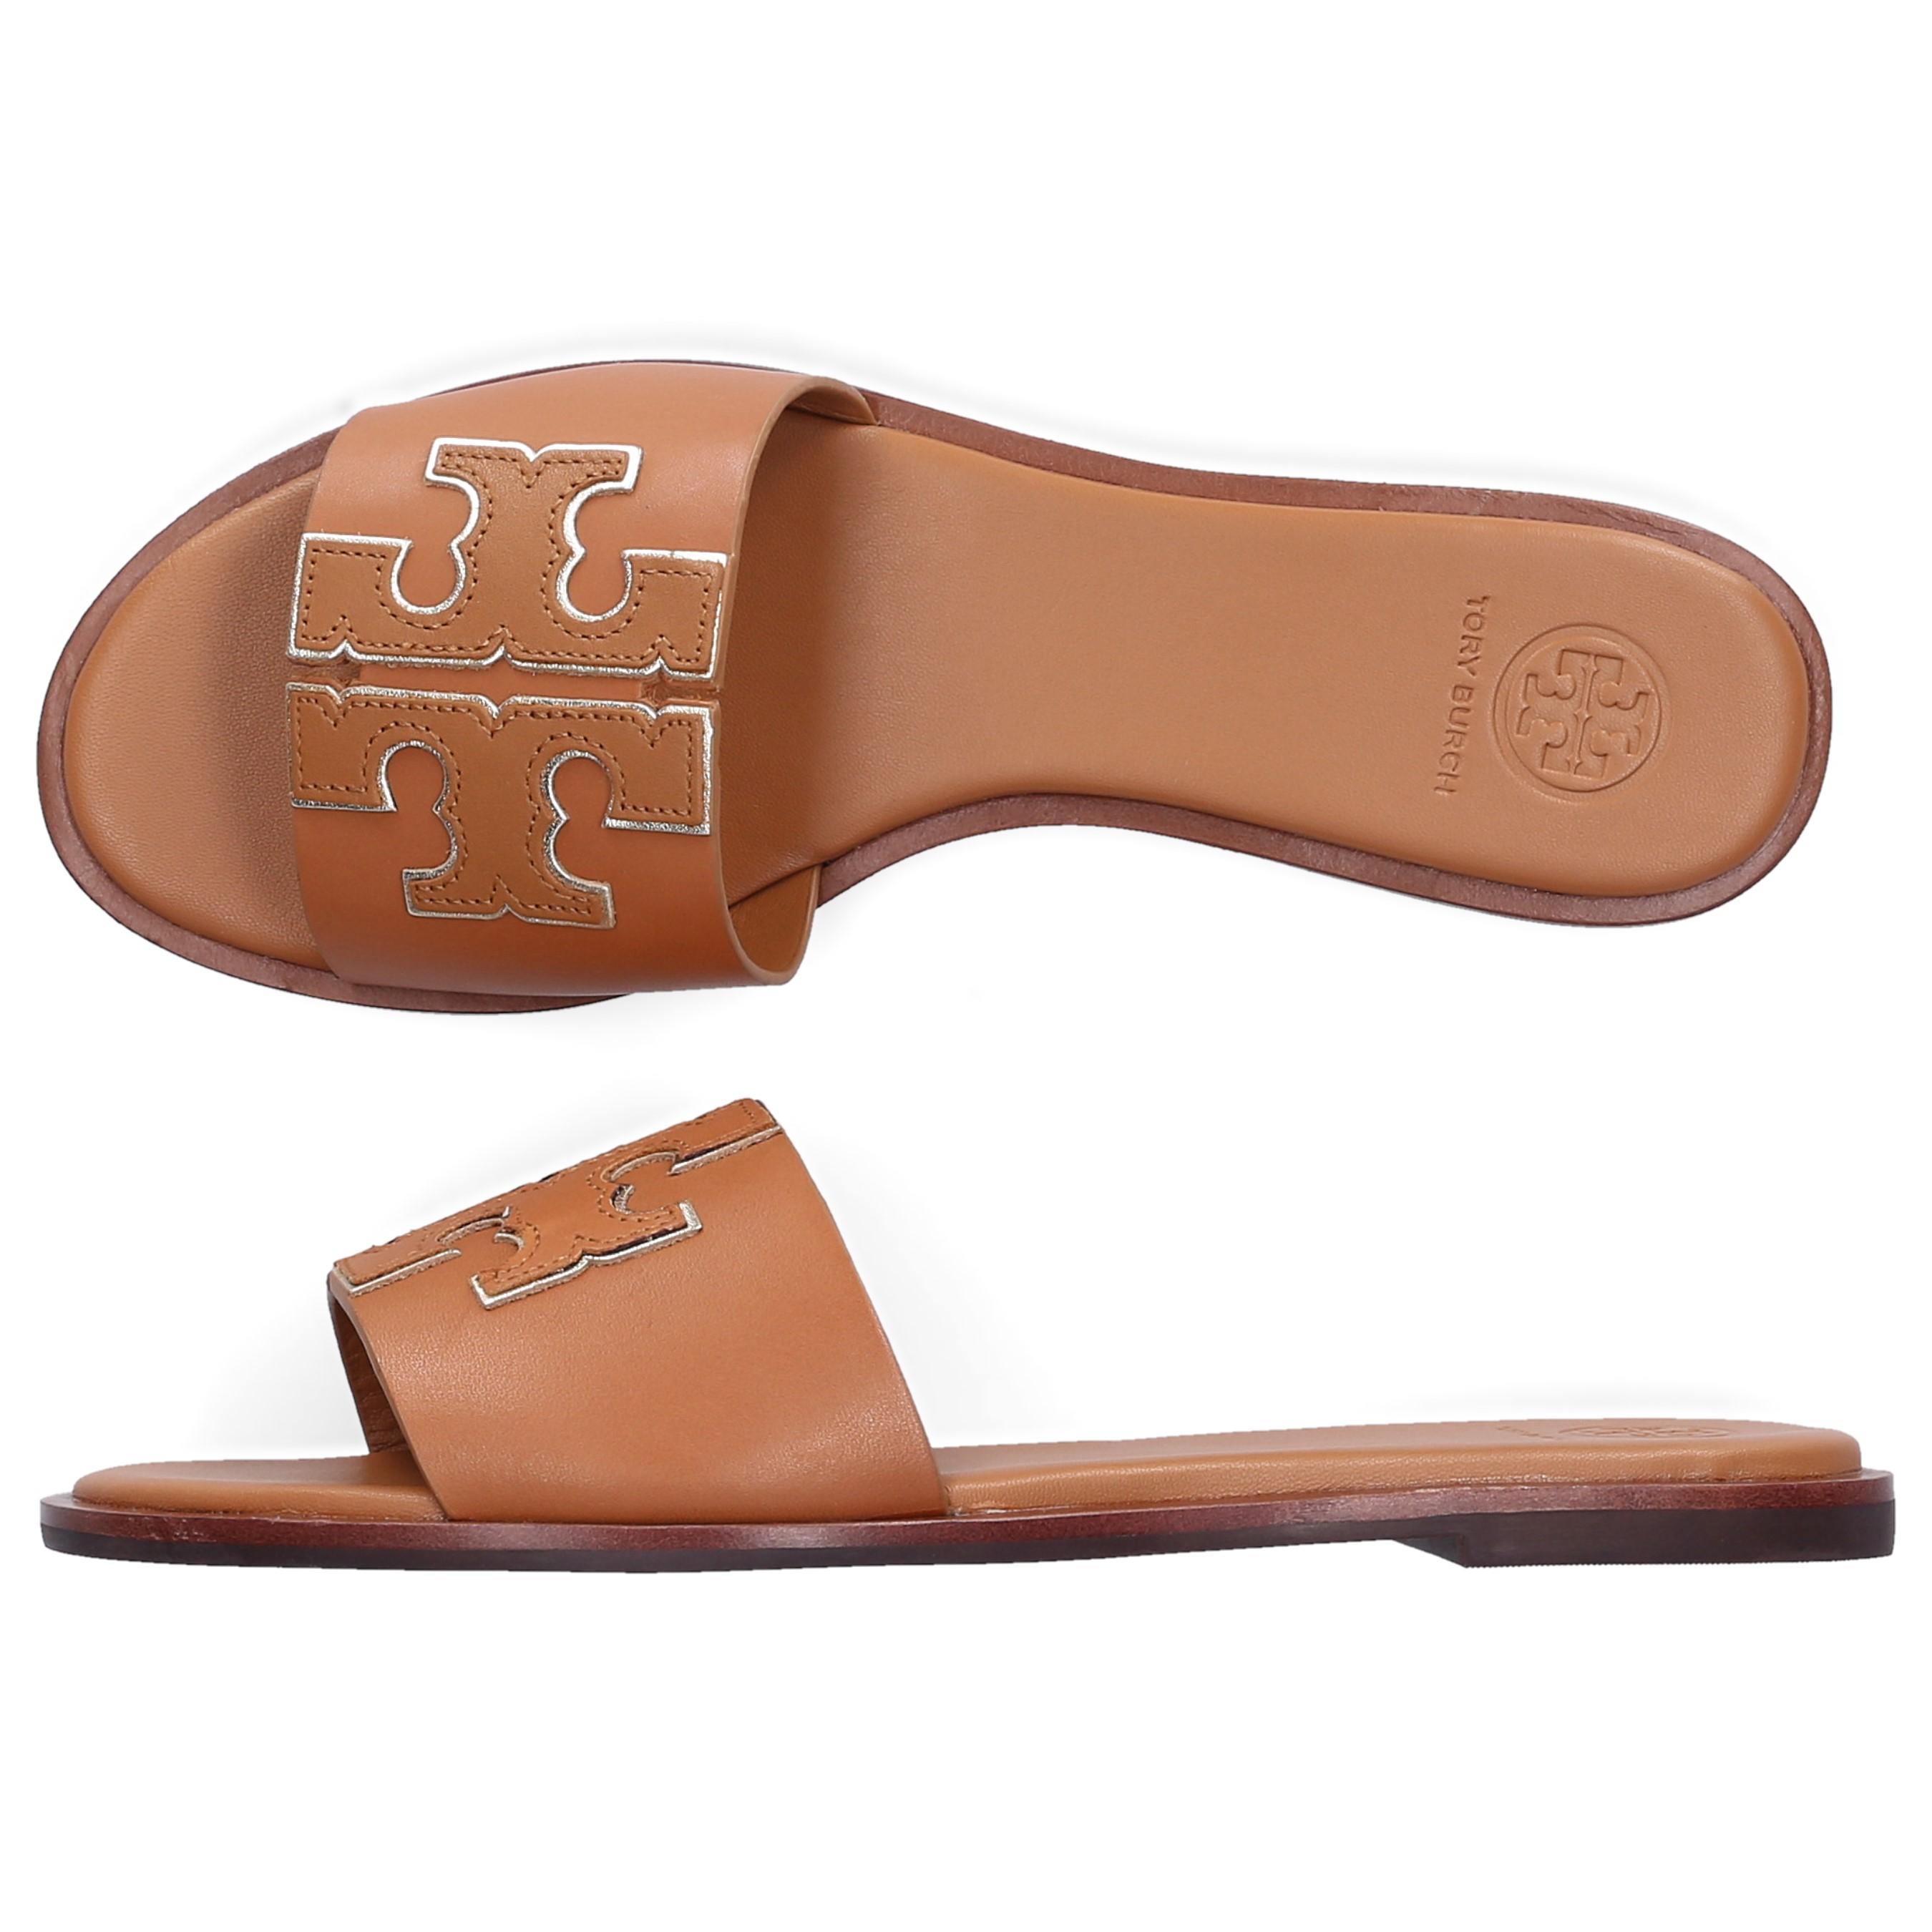 Tory Burch Leather Sandals Ines Slide in Beige,Gold (Natural) - Lyst